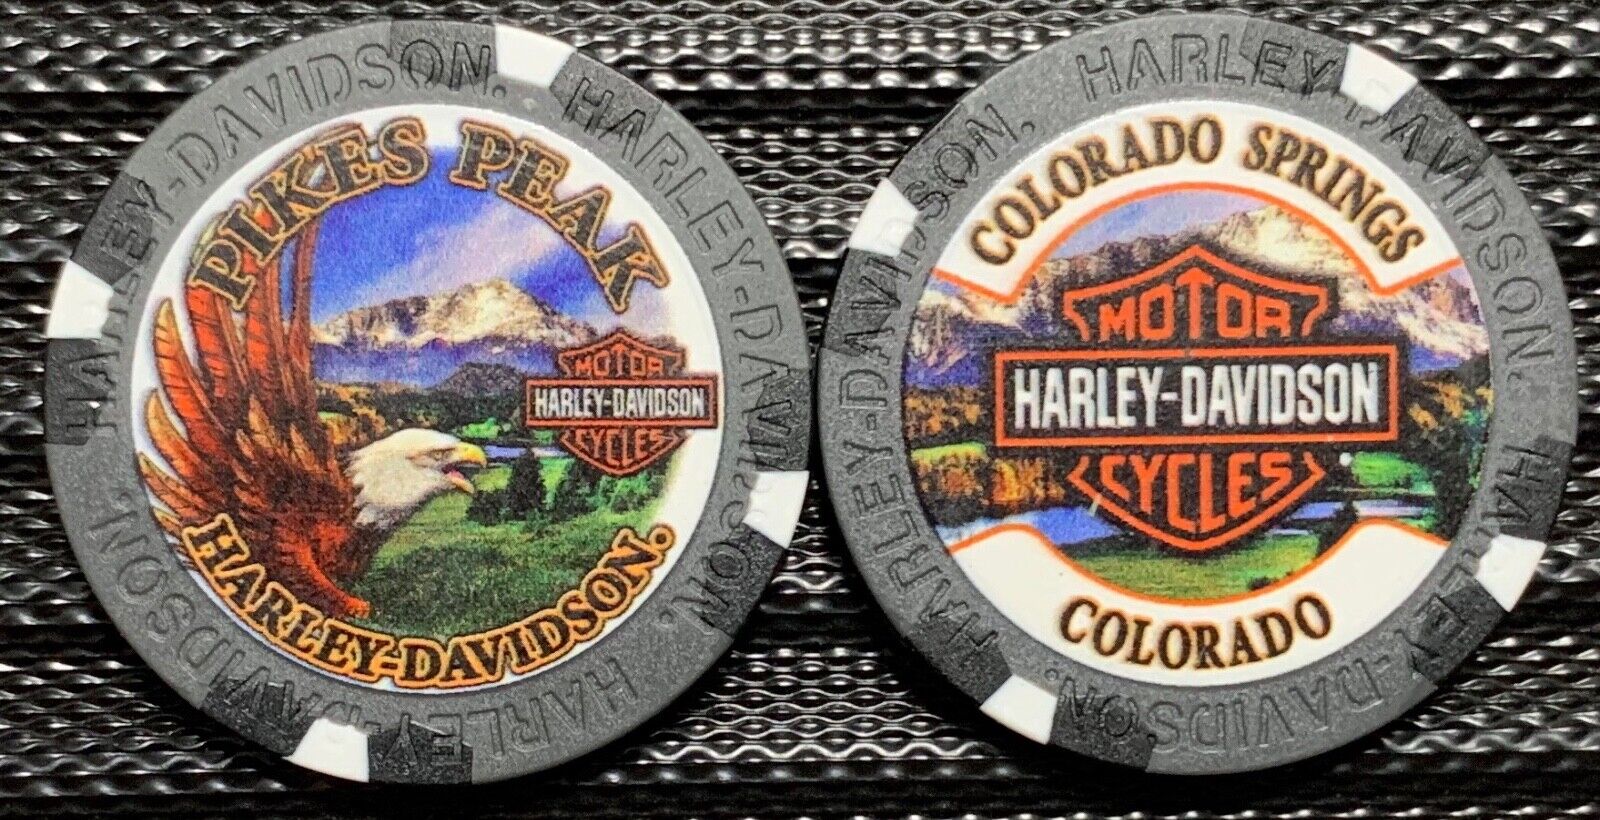 Pikes Peak Harley-Davidson® in Colorado Springs, CO Collector Poker Chip Gray/Bl